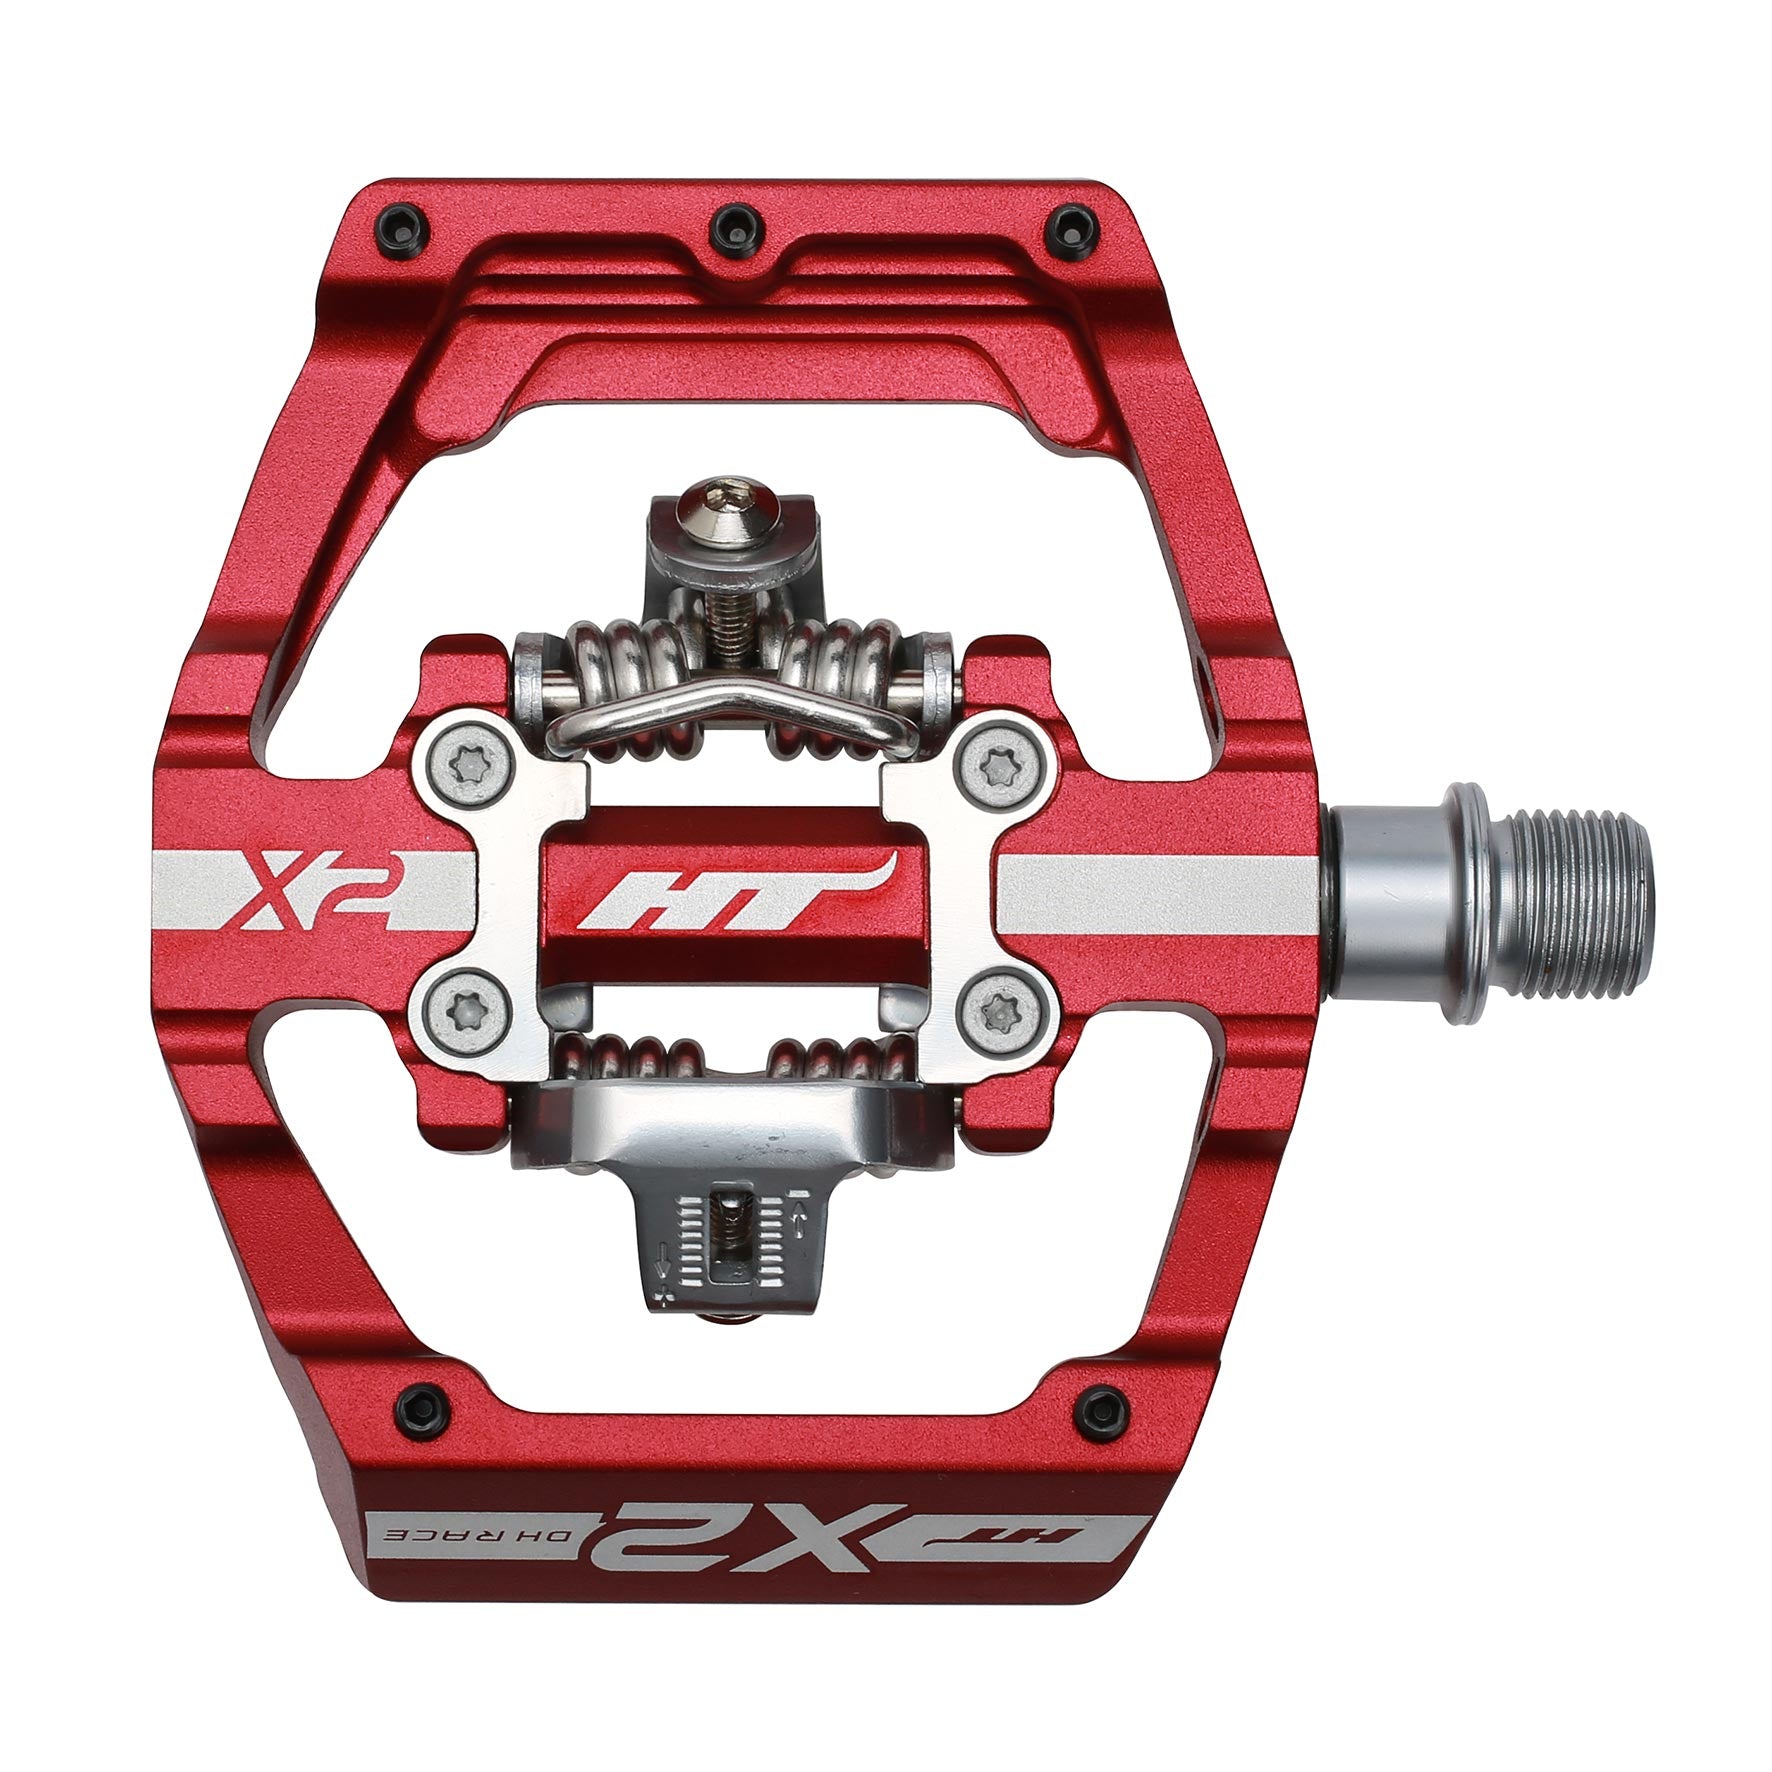 Ht X2 Pedals Alloy / CNC CRMO - Red